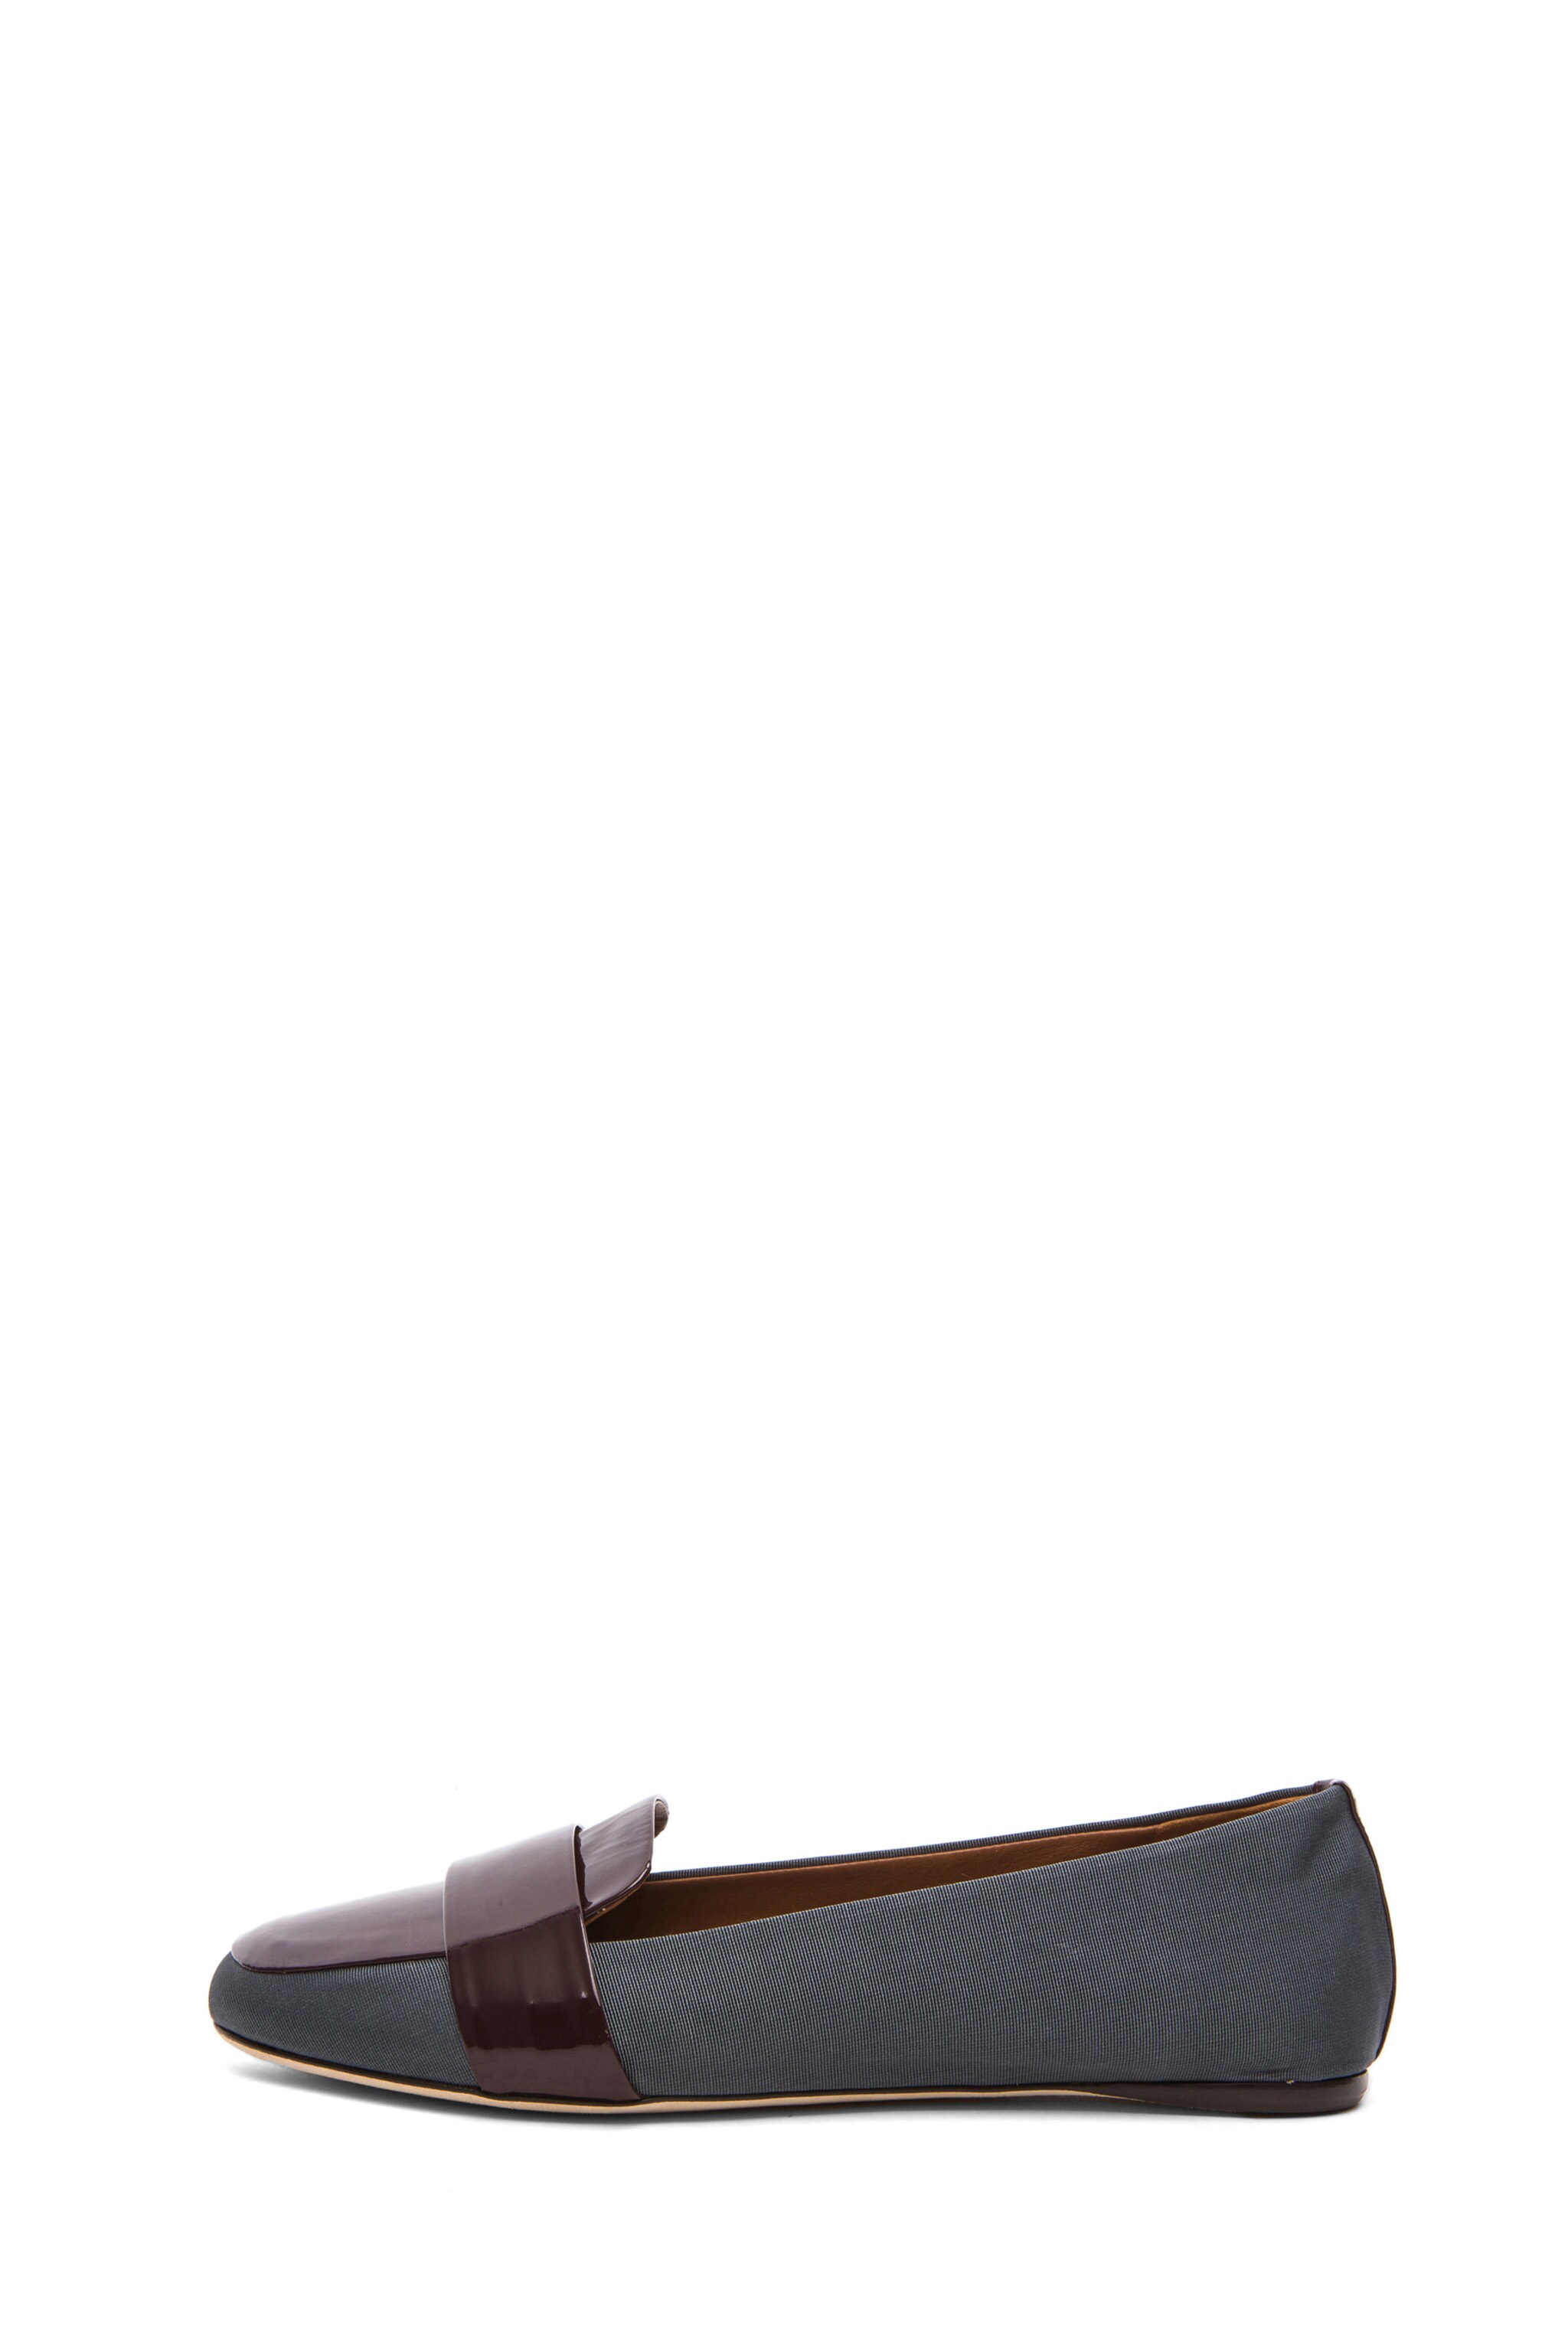 Image 1 of Reed Krakoff Patent Loafers in Grey & Cordovan